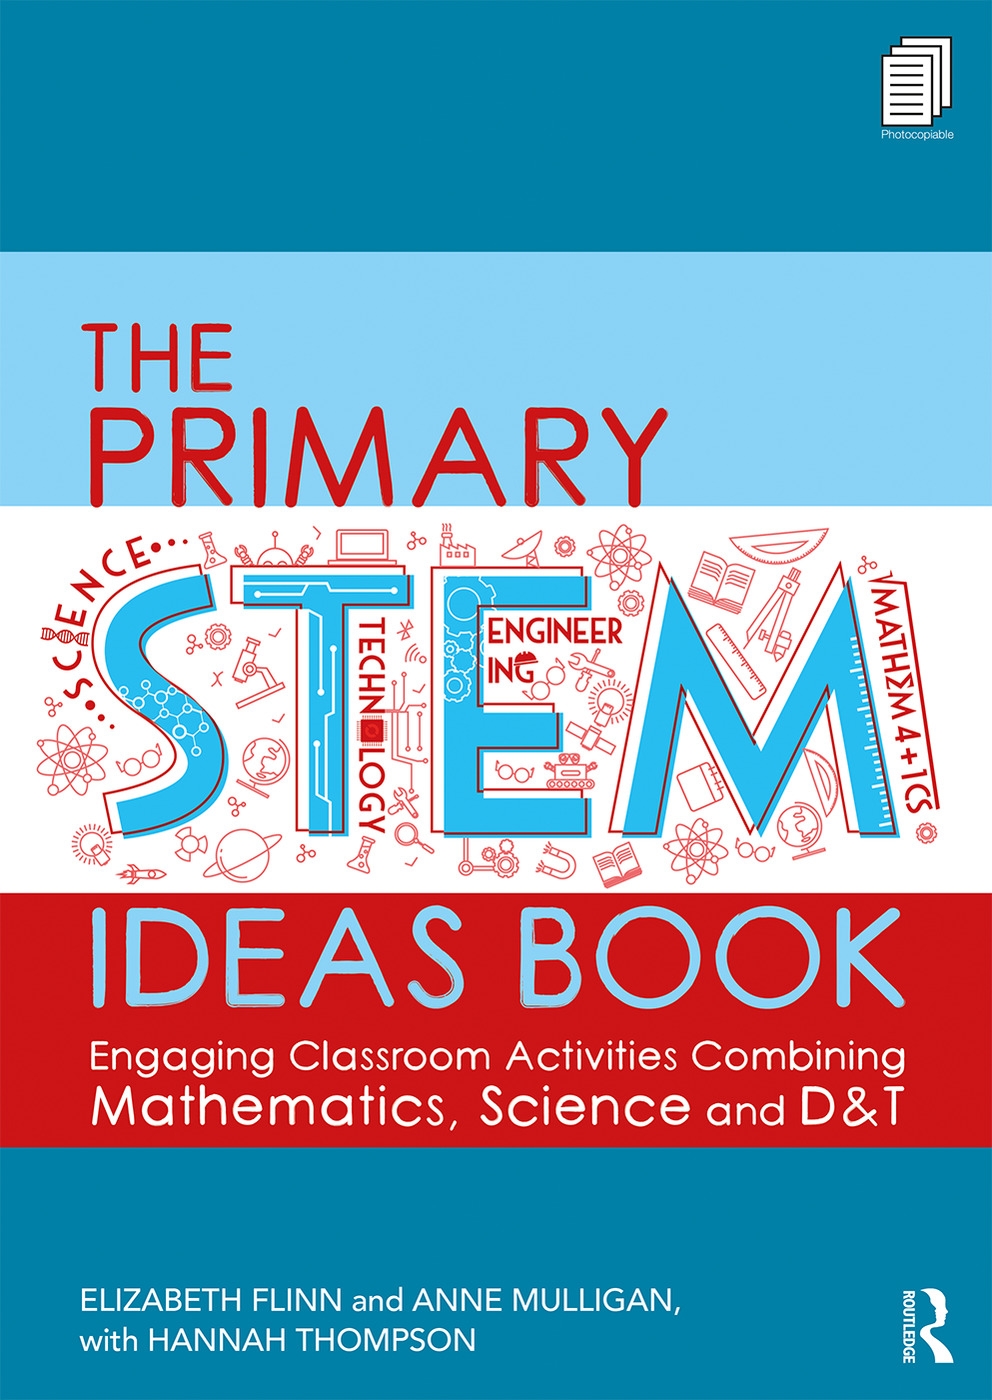 The Primary Stem Ideas Book: Engaging Classroom Activities Combining Mathematics, Science and D&t